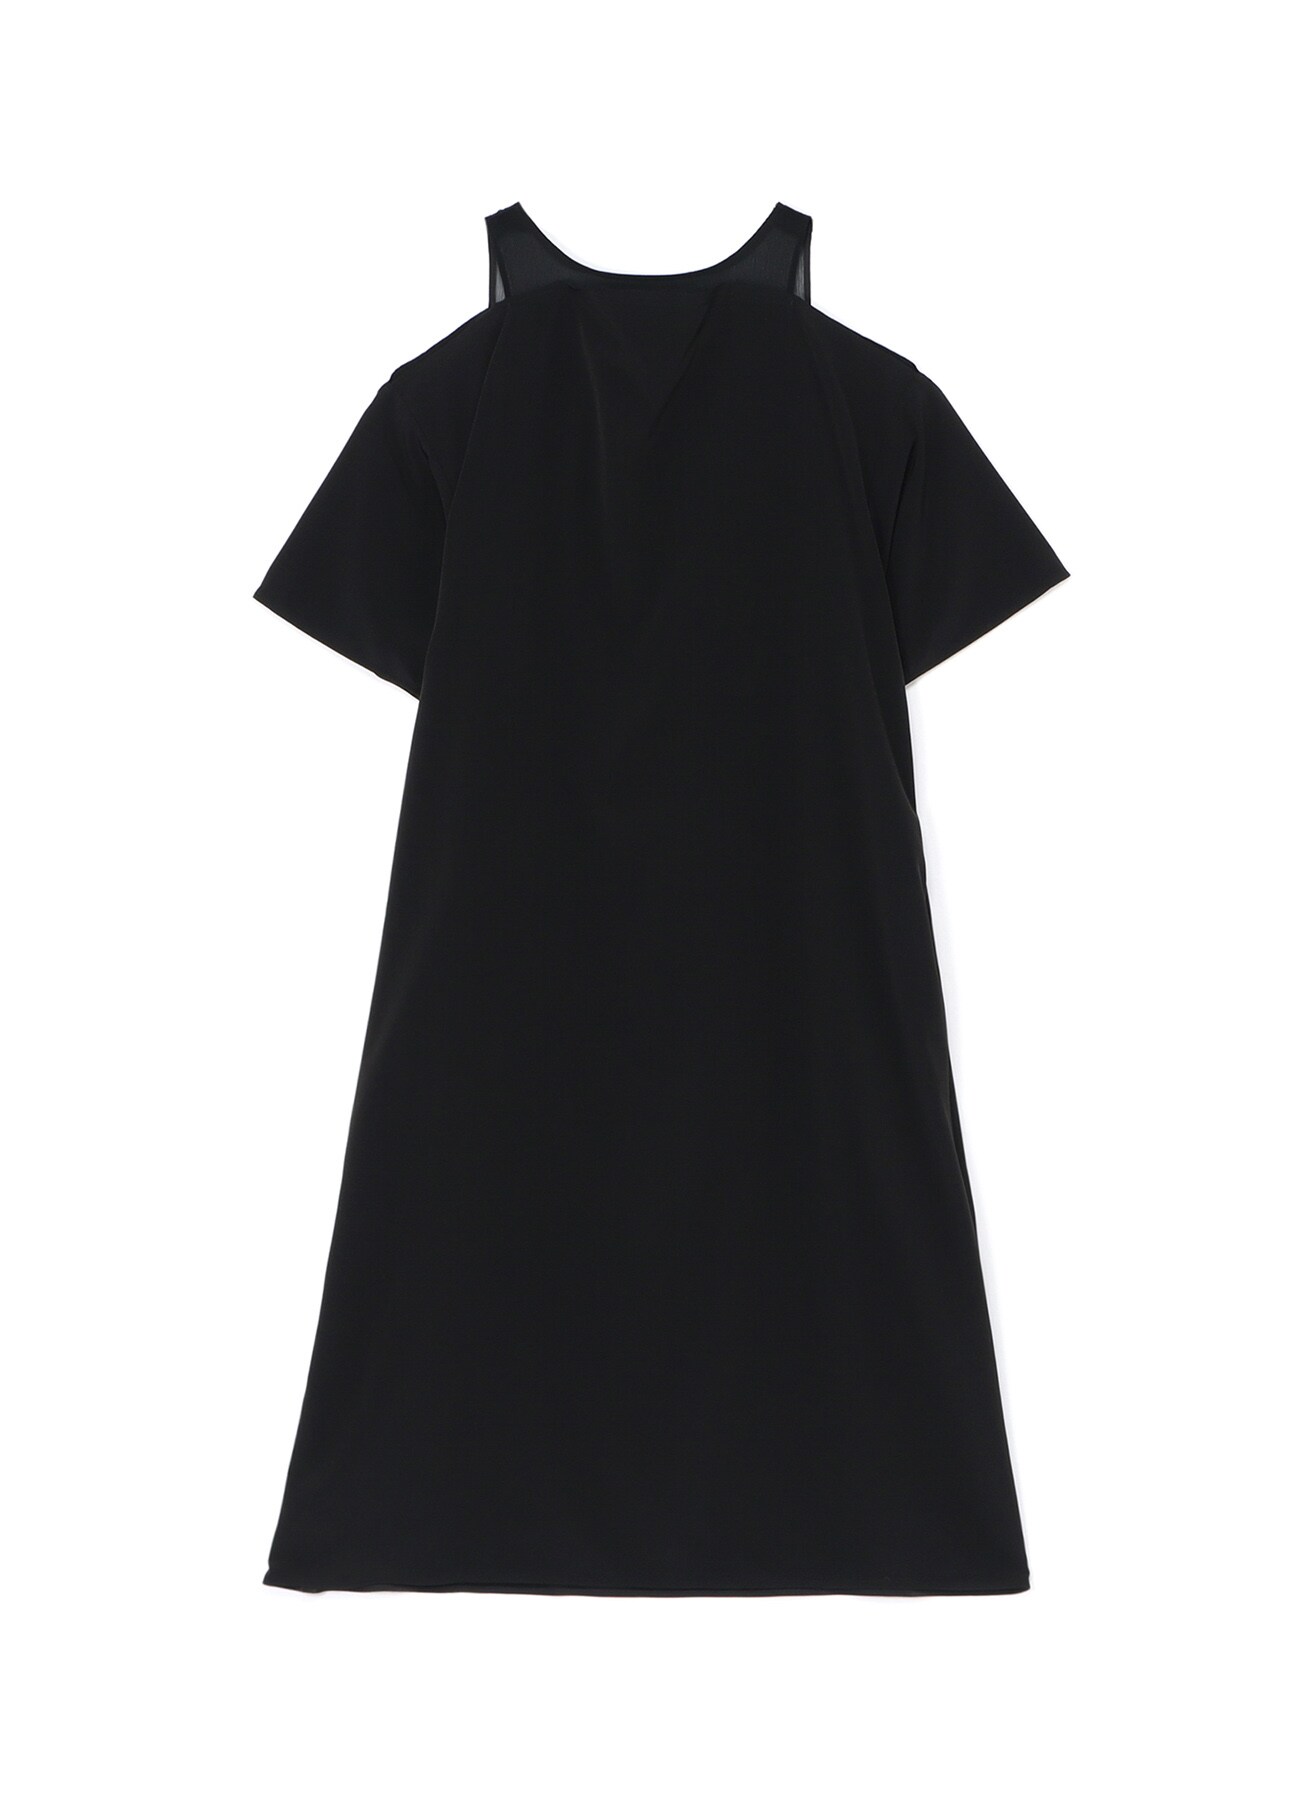 TRIACETATE POLYESTER DOUBLE LAYERED DRESS(XS Black): Vintage 1.2 